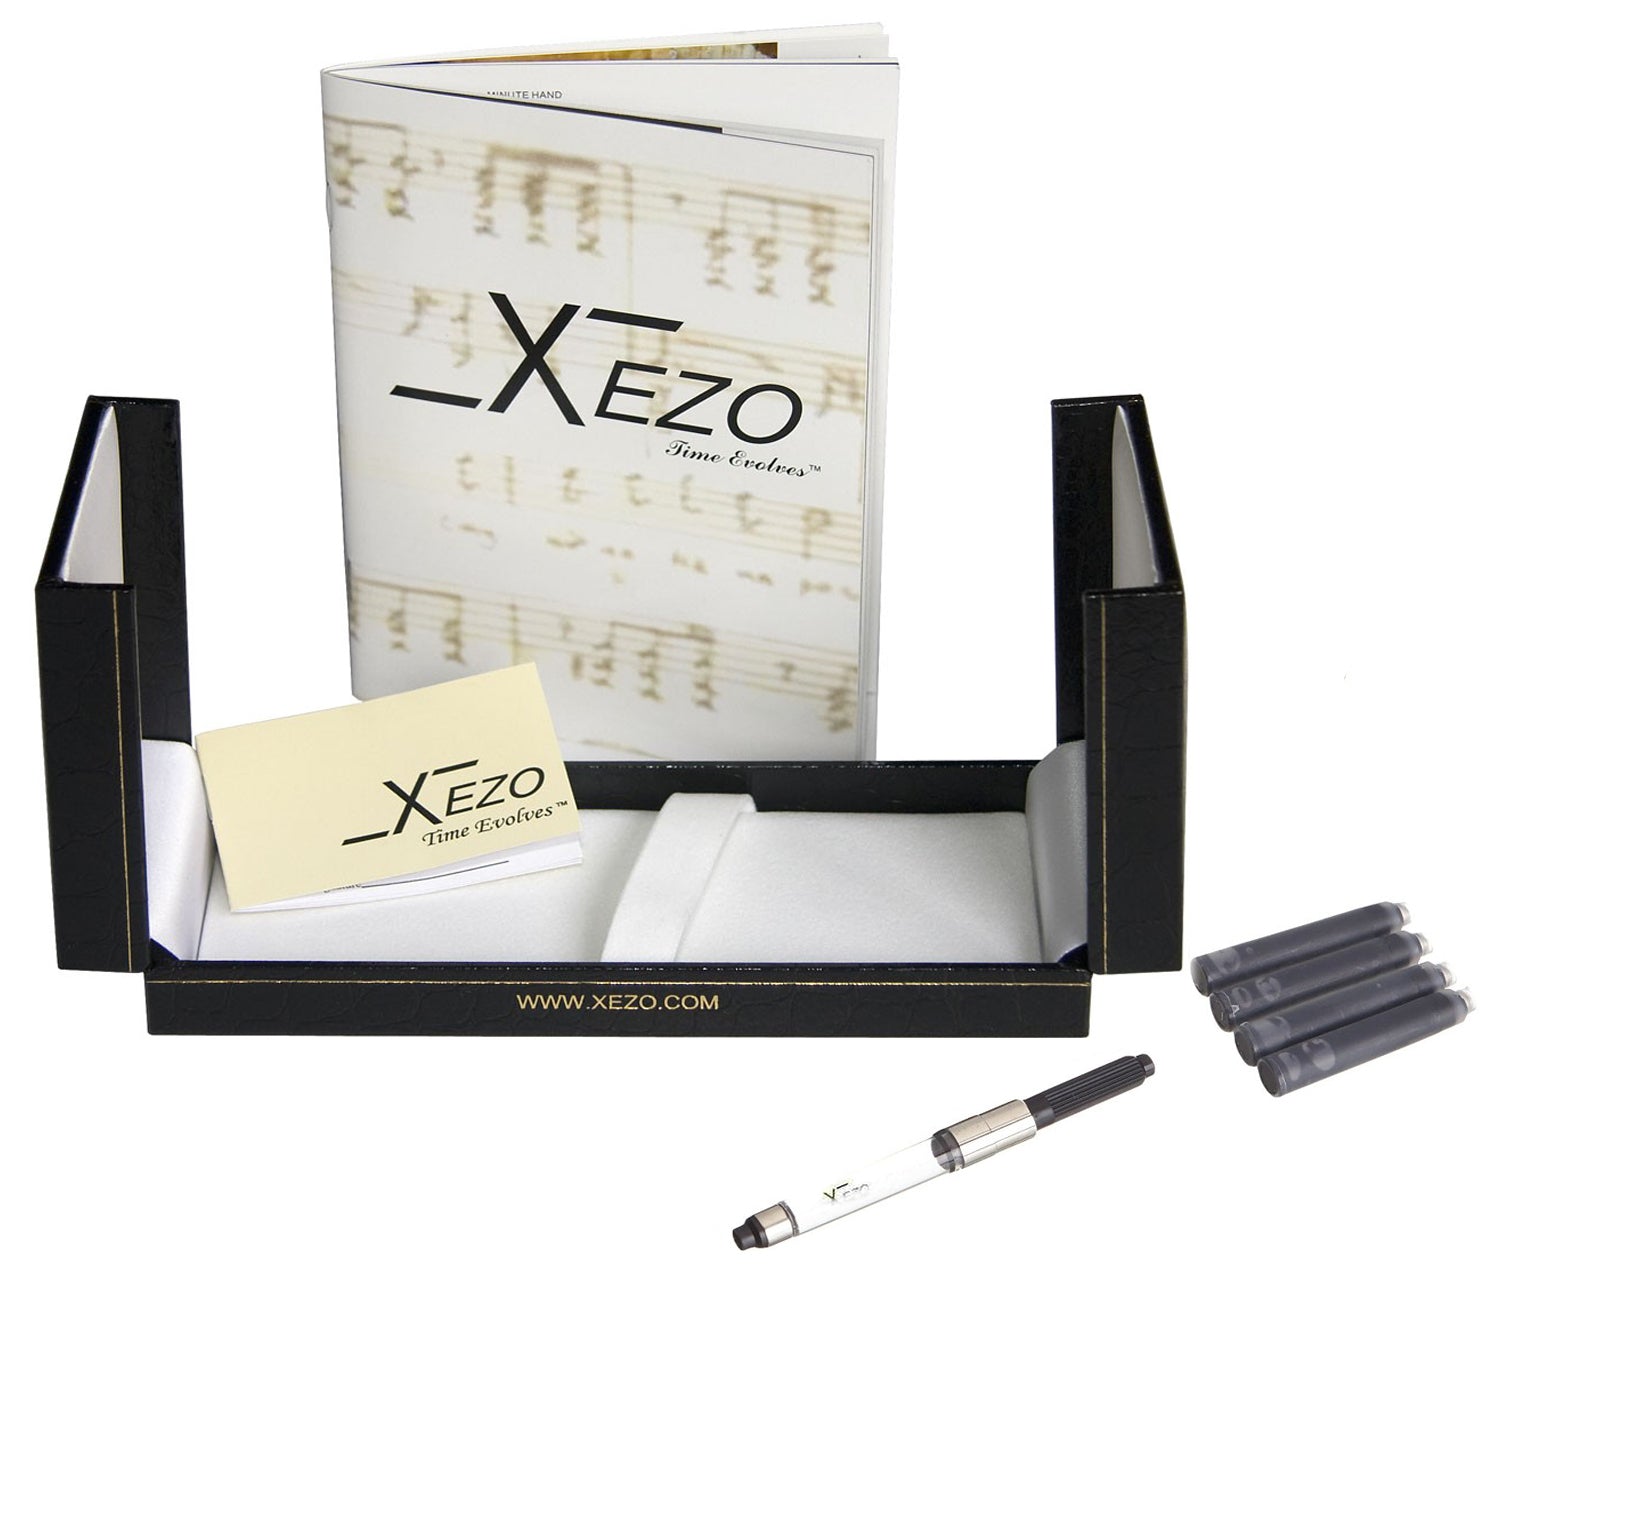 Xezo - Black gift box, certificate, manual, chrome plated ink converter, and four ink cartridges of the Incognito Forest F fountain pen